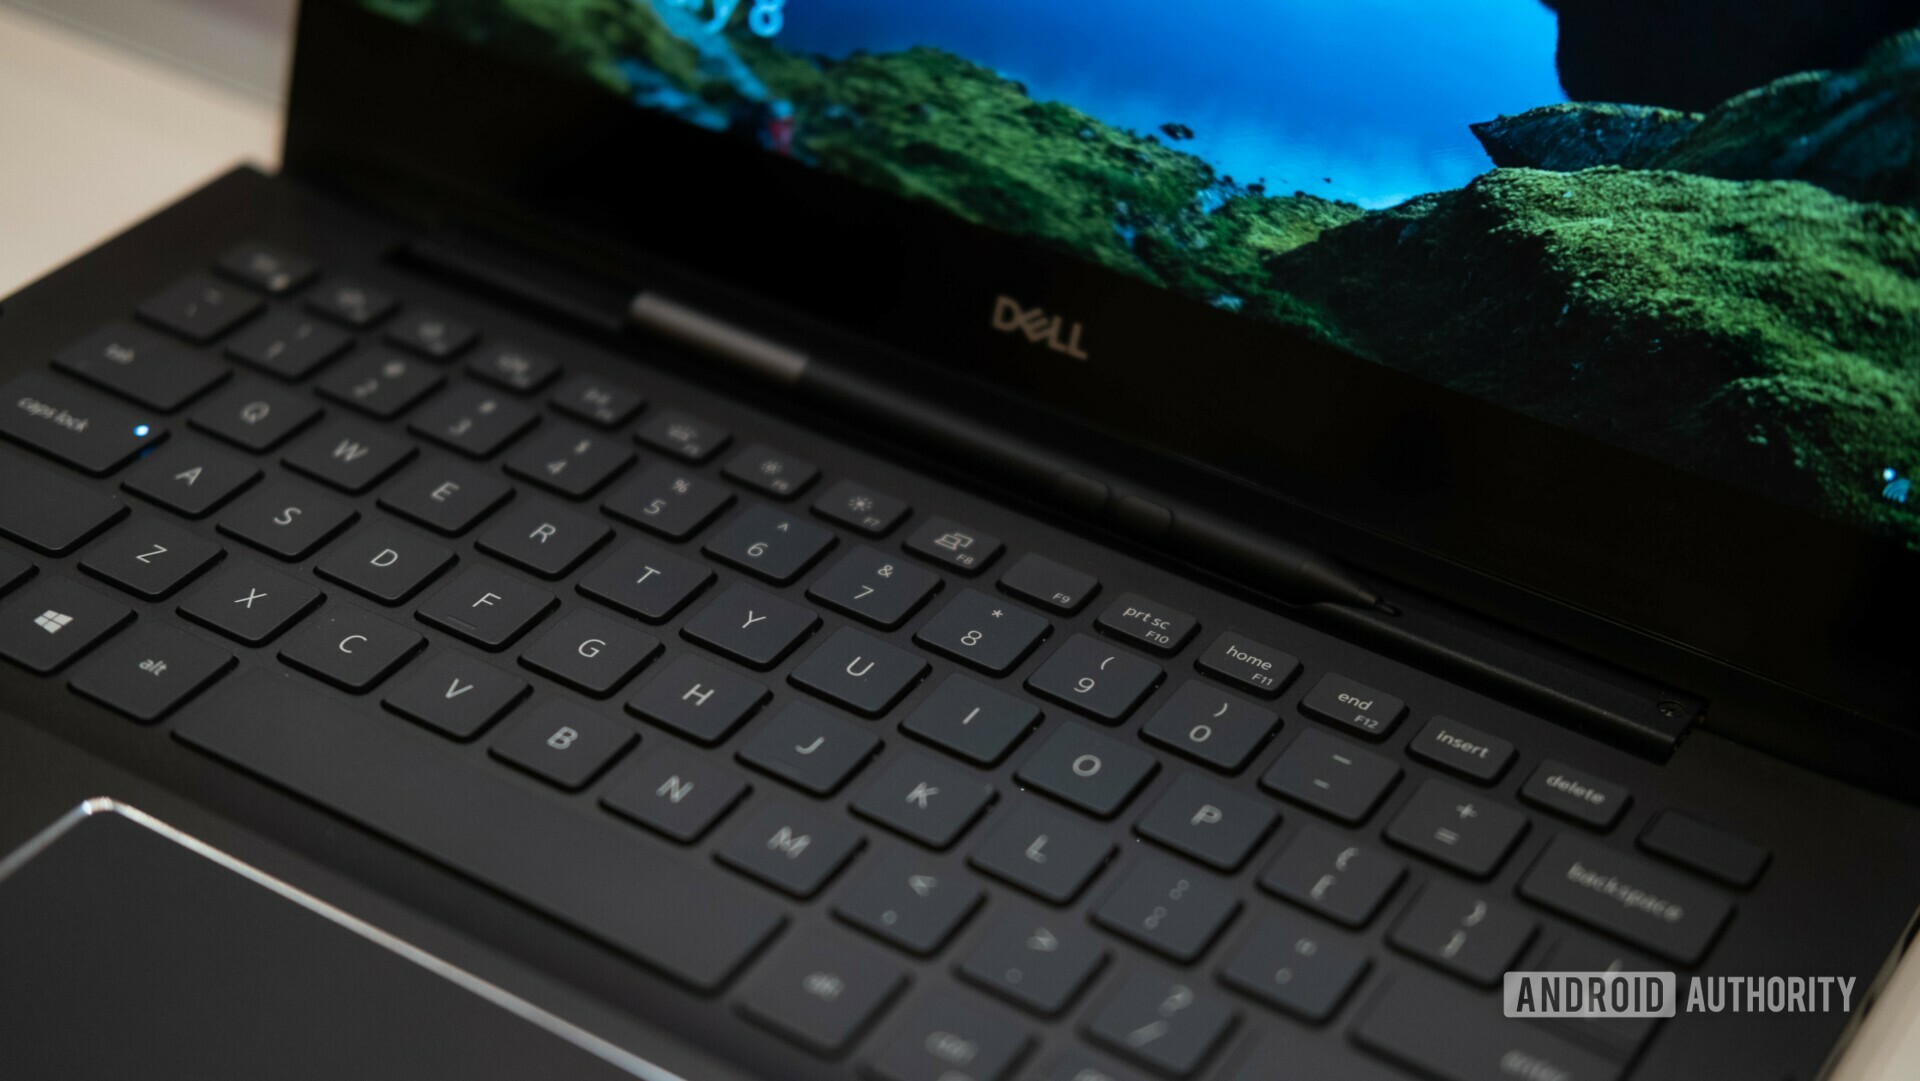 picture of the keyboard of a dell laptop